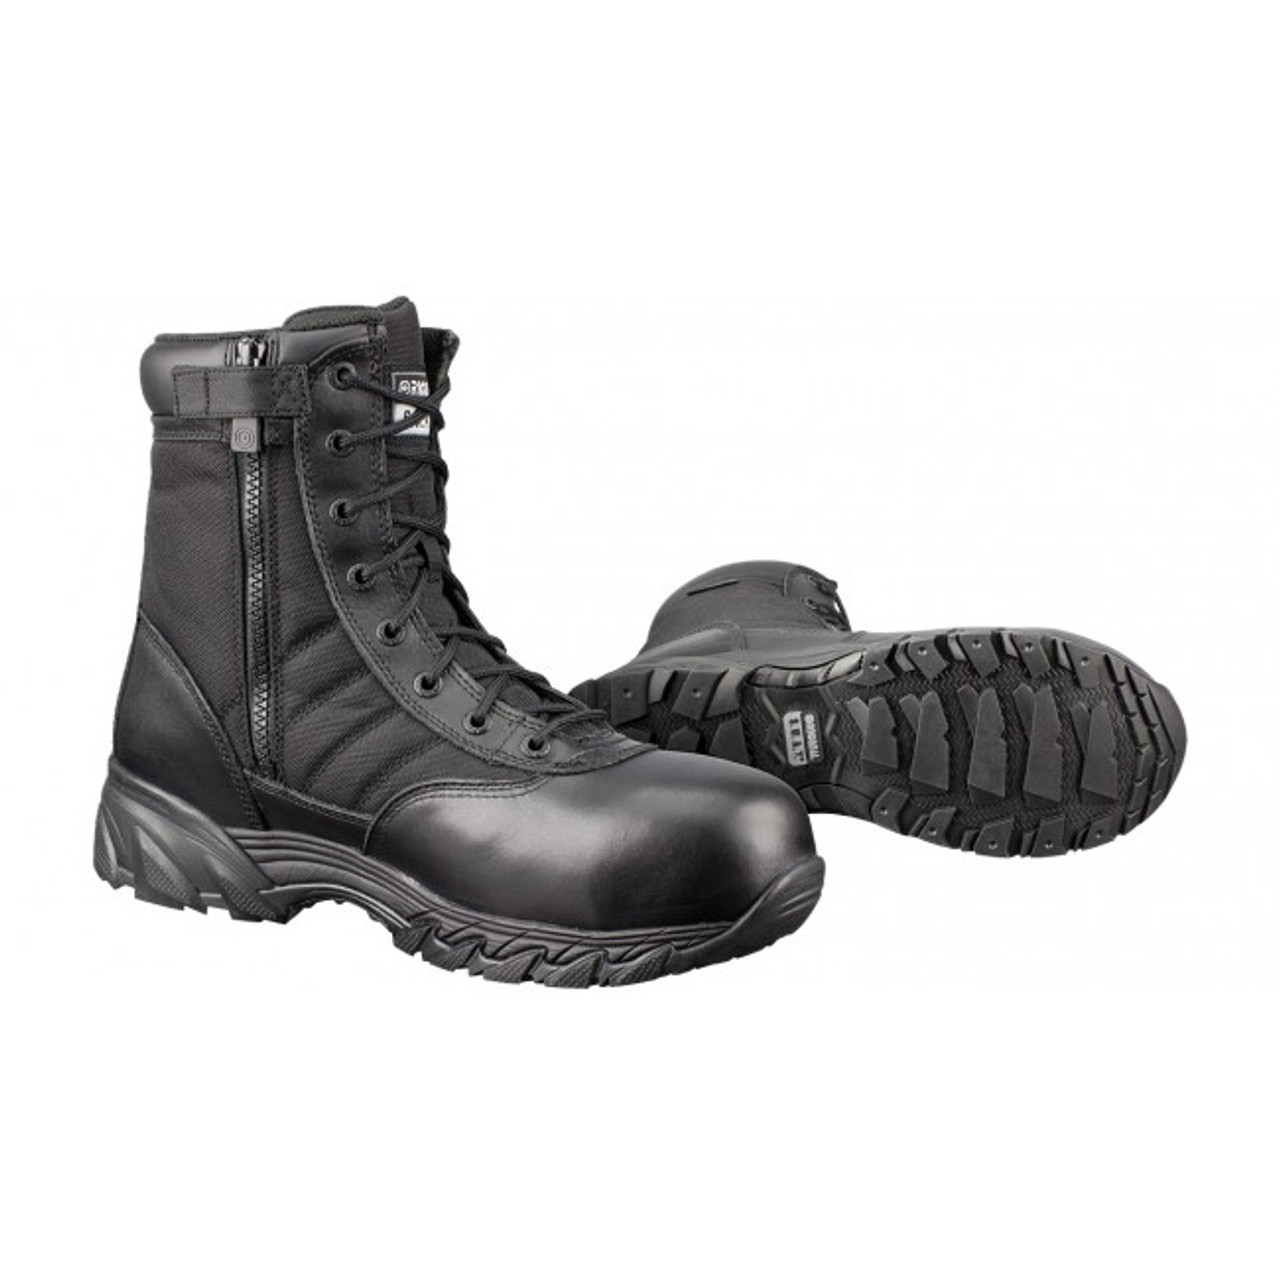 swat safety boots